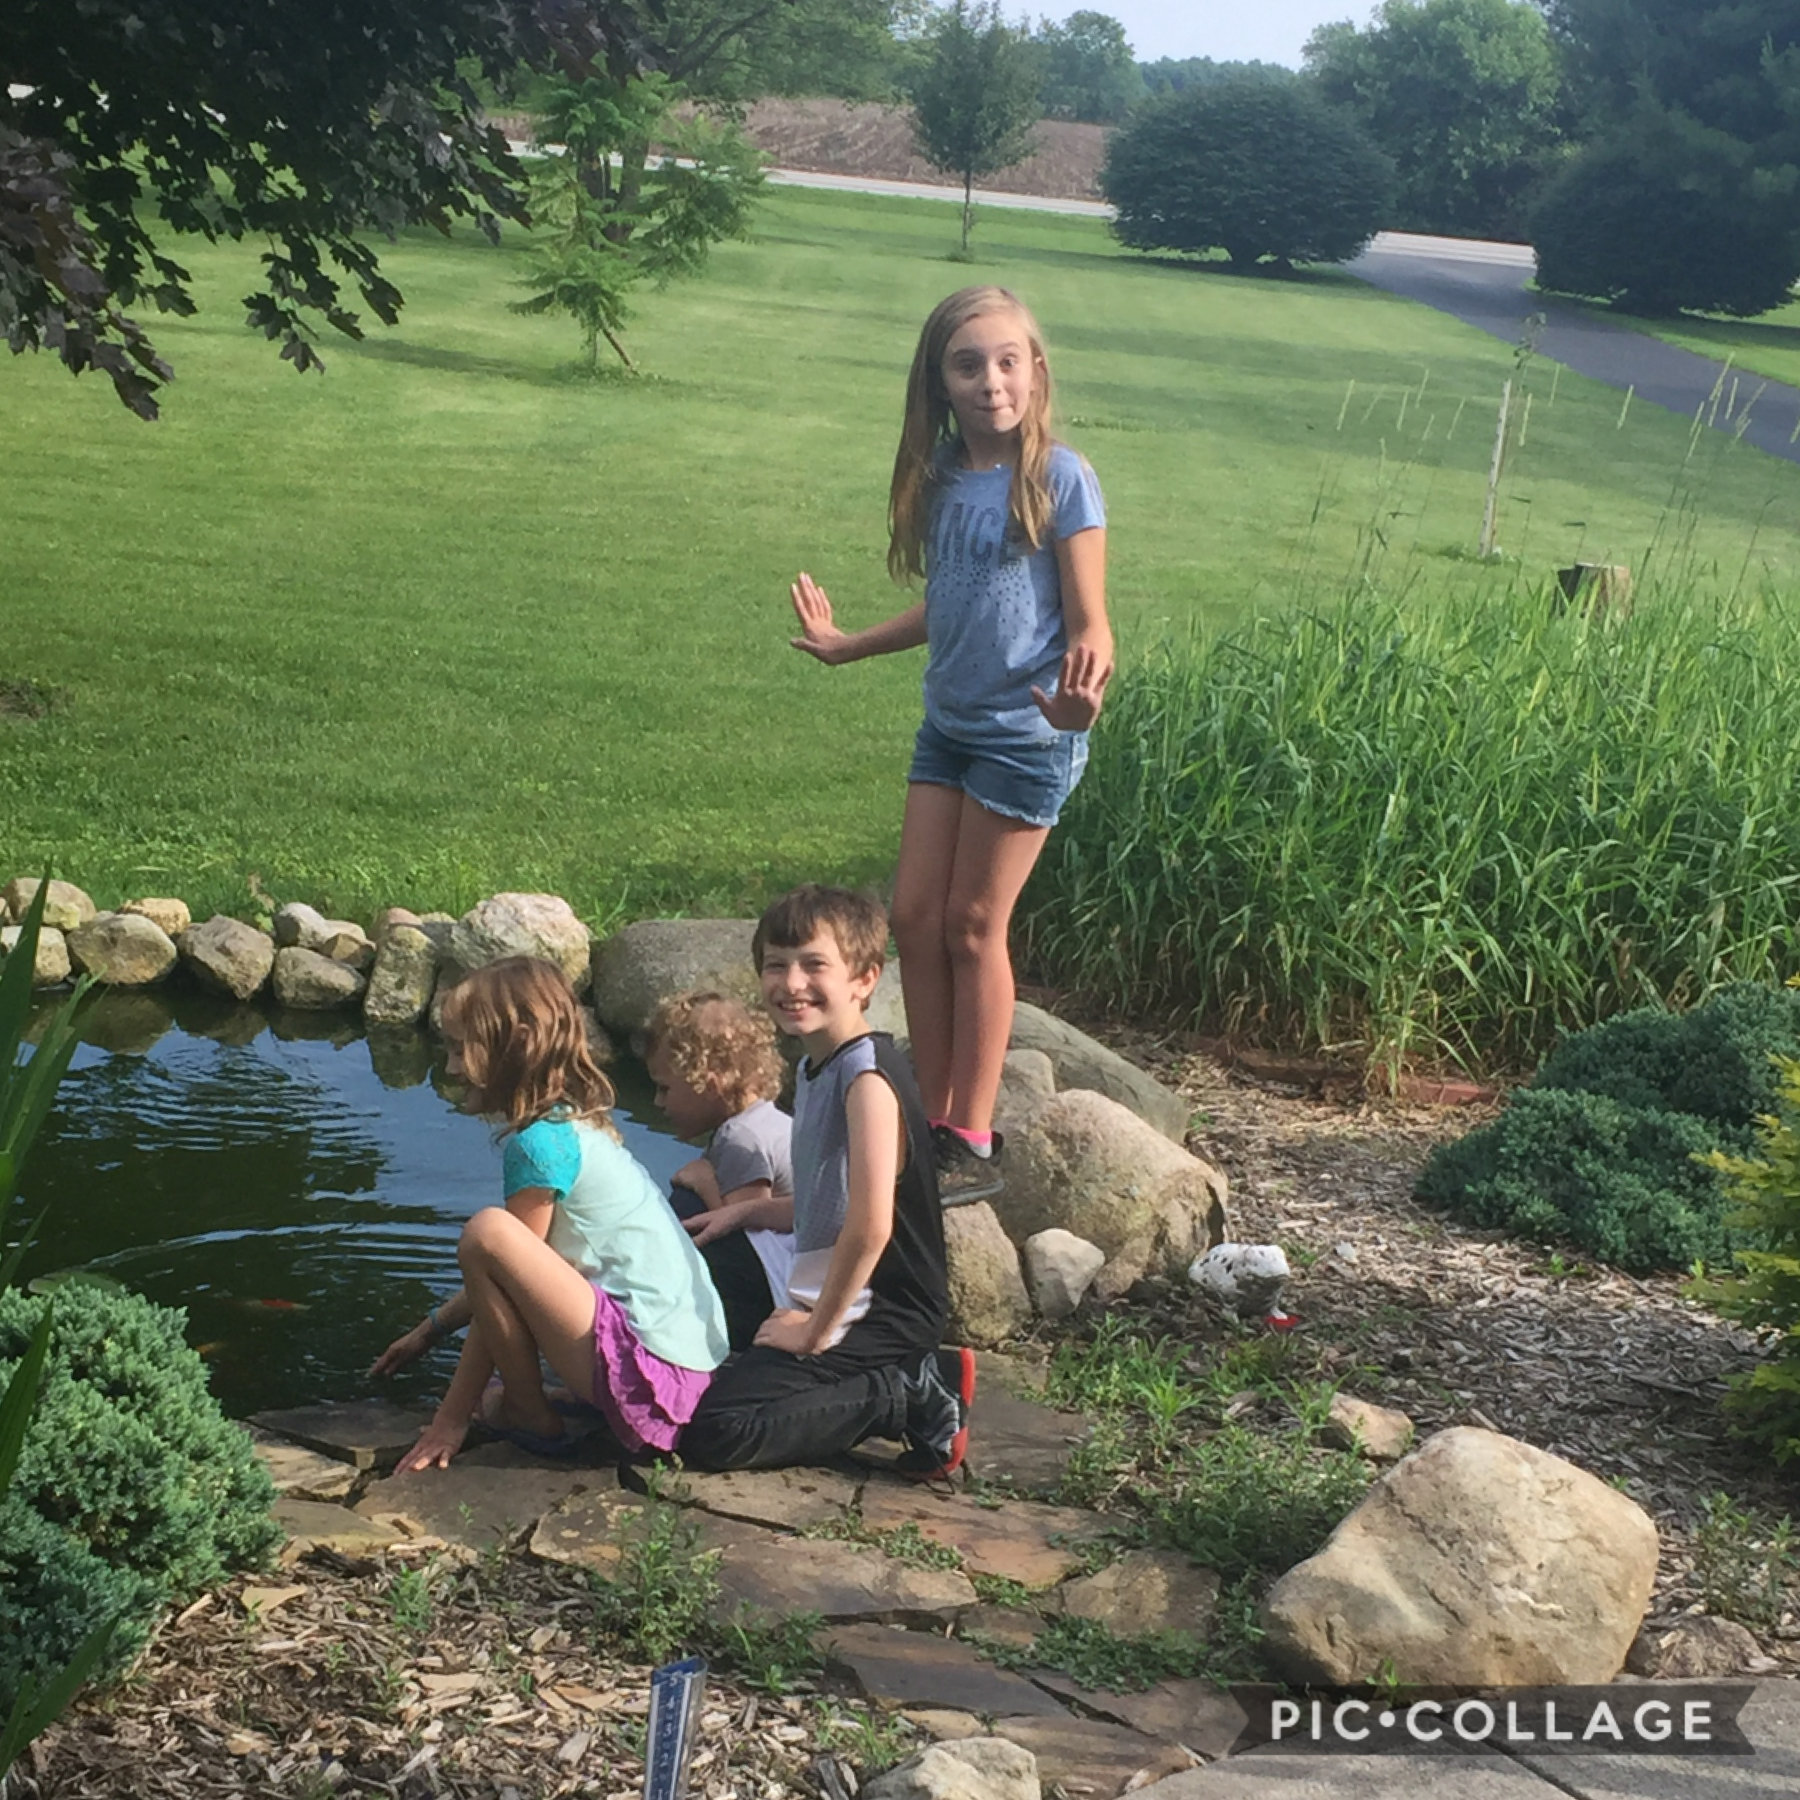 In this pic we were in greenfield with my moms friend and these are her kids my sister and me. I’m the one standing my sister is in the purple skirt. Then the other girl and the boy are her kids. But some how her second boy mist the pic.
# BFF FOR LIFE